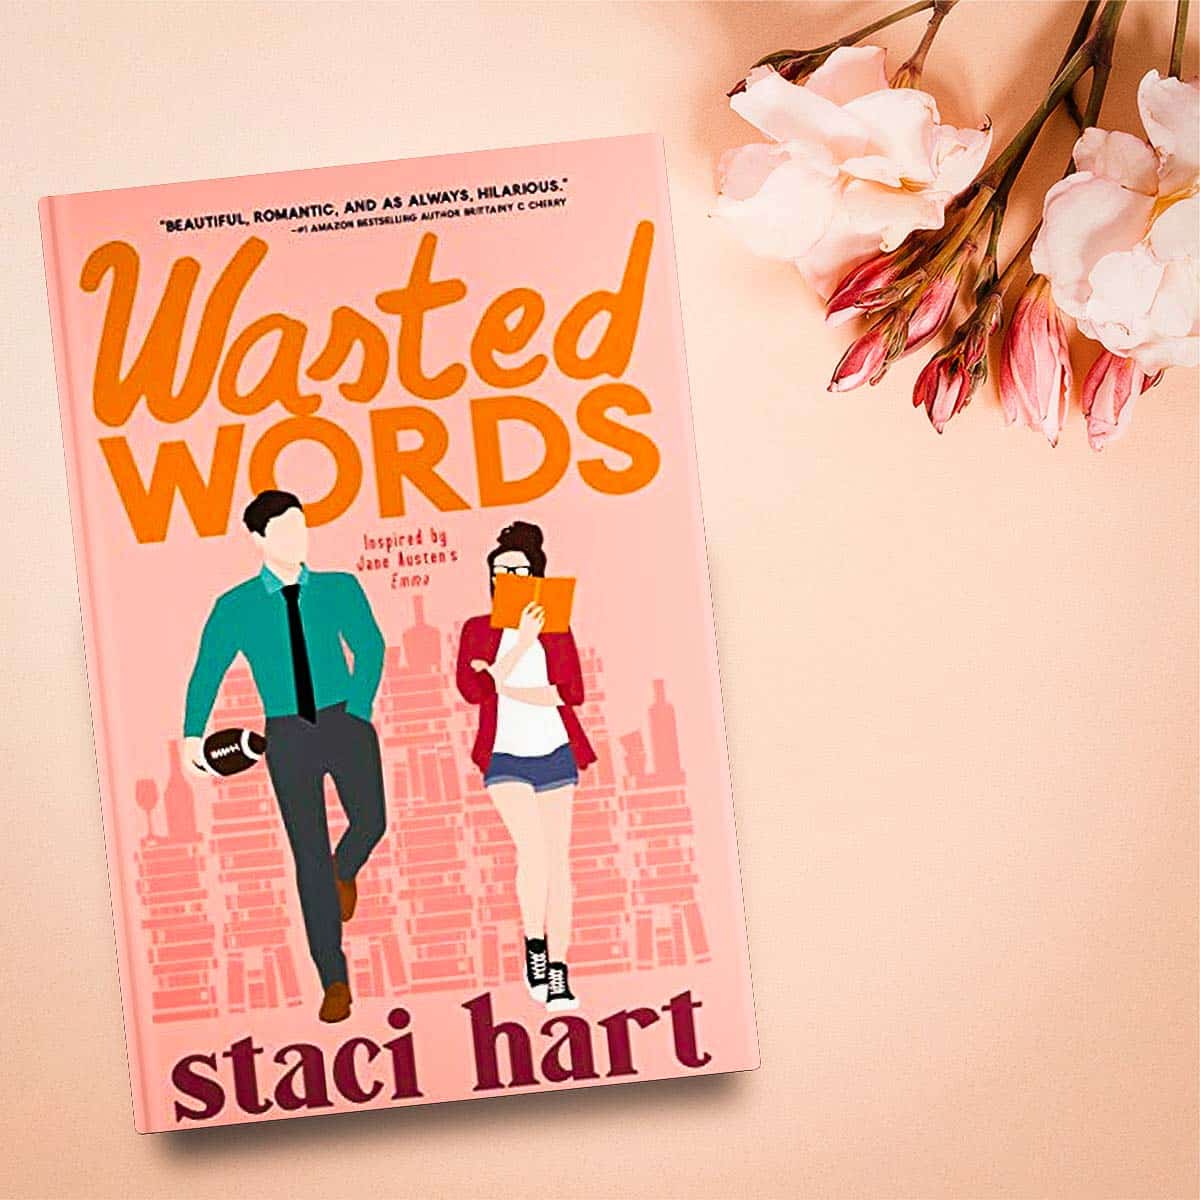 Wasted Words by Staci Hart is a reimagining of Jane Austen's Emma complete with a meddling matchmaker, opposites attract chemistry, and roommates who fall for the person right under their nose